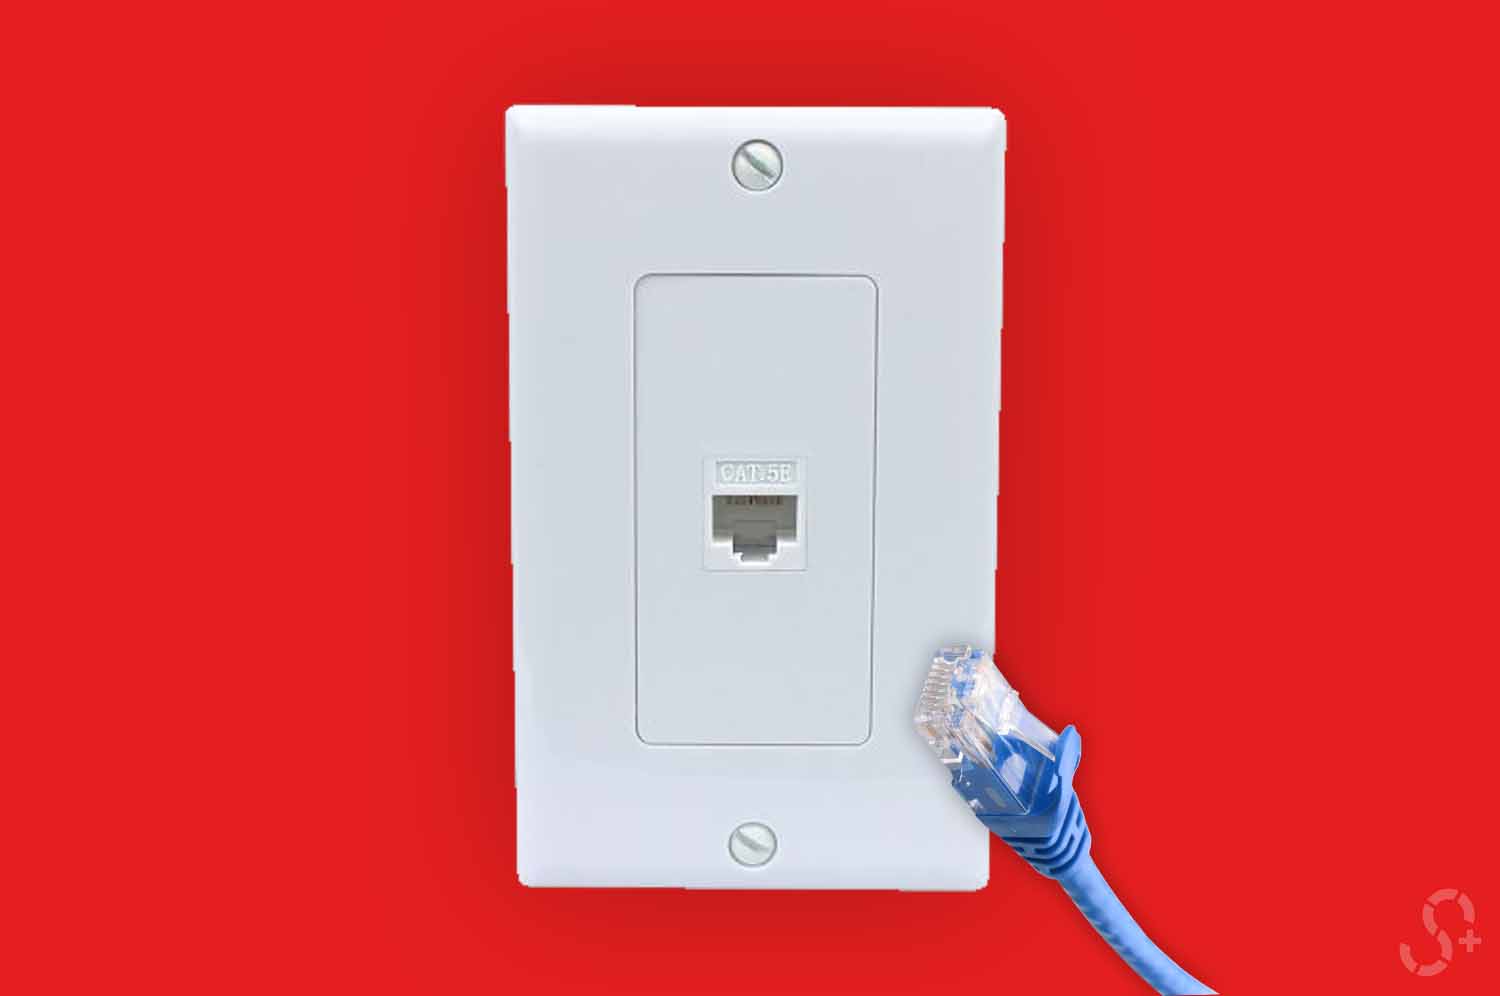 Ethernet port with ethernet cable in front red background